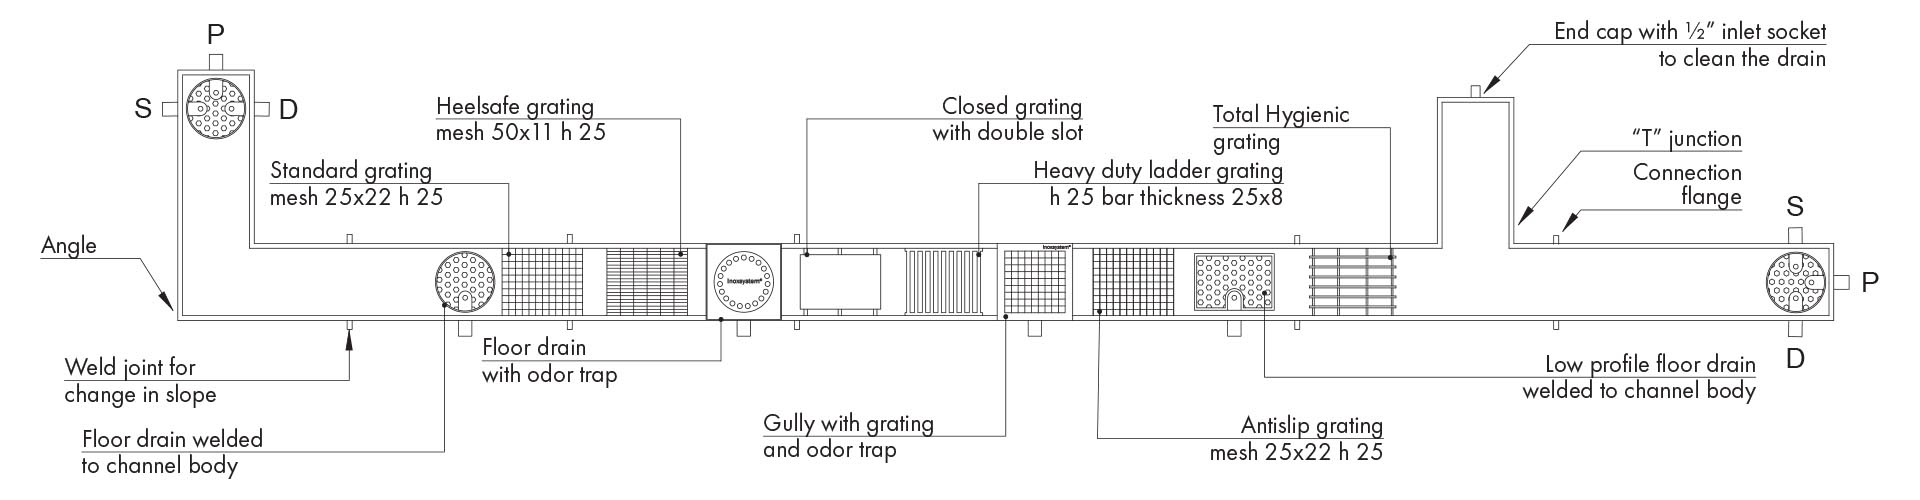 General plan view of stainless steel grating channel